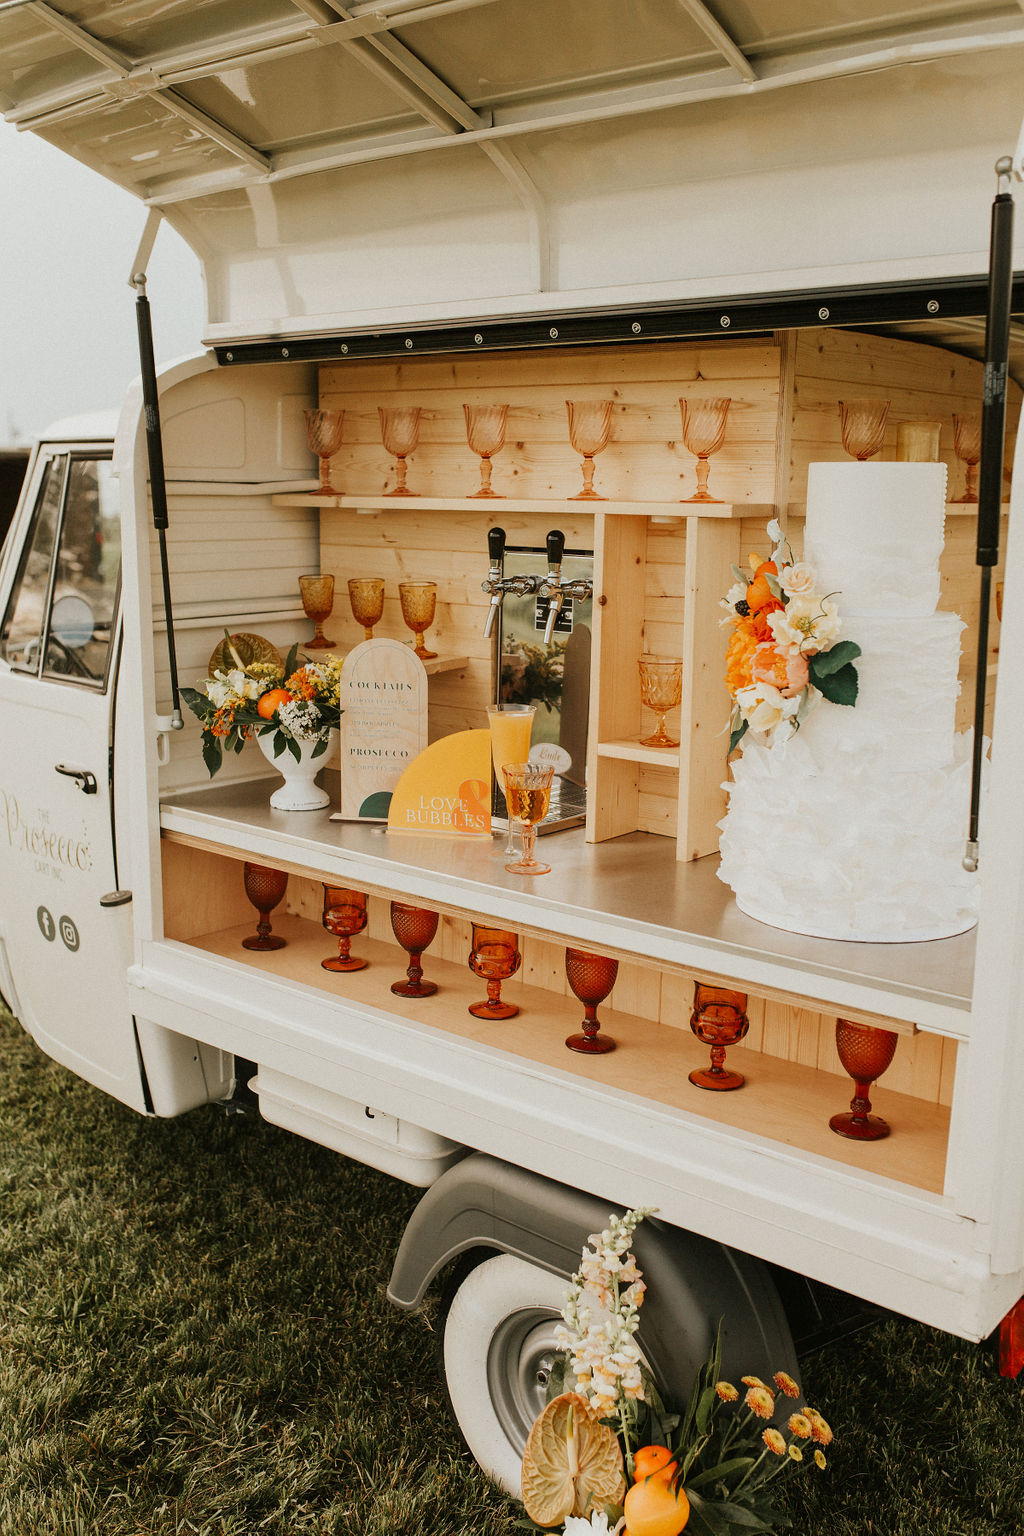 Three tiered ruffled white wedding cake with tangerine floral accents on a mobile prosecco bar cart for wedding decor inspiration